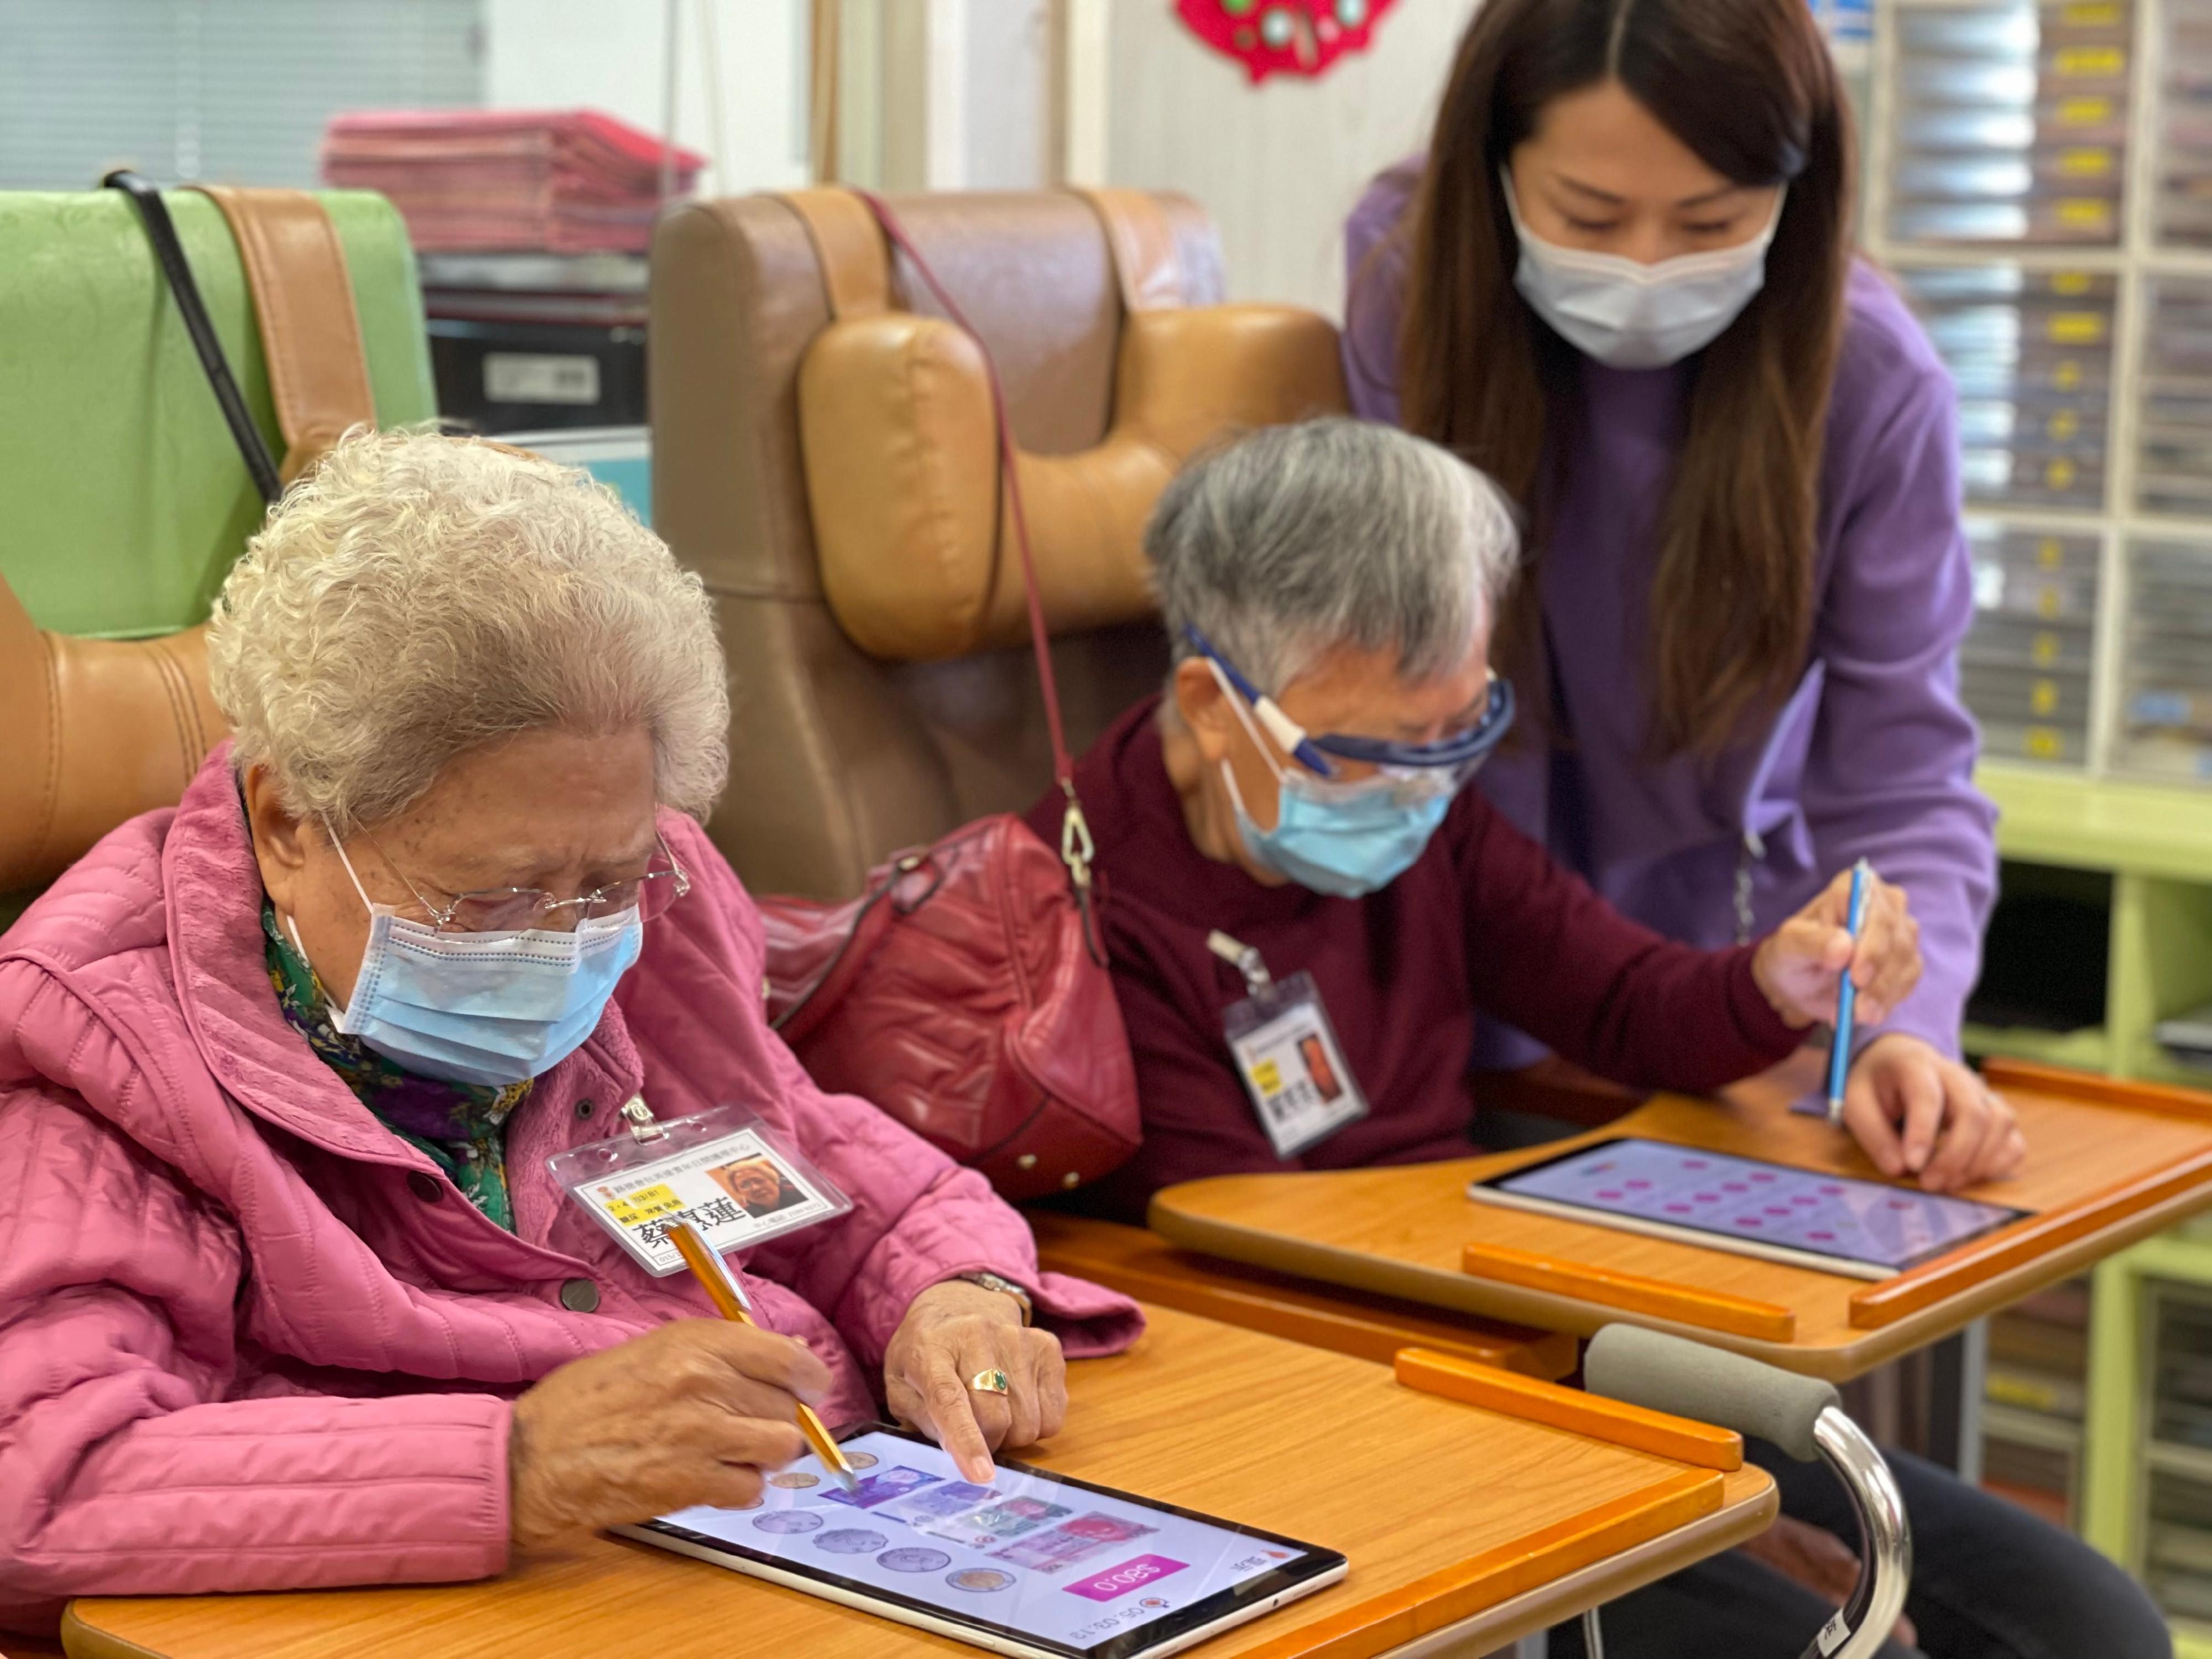 The Office of the Government Chief Information Officer announced today (June 14) that a new round of the ICT Outreach Programme for the Elderly was launched. Photo shows elderly people attending cognitive training with tablets in the previous round of the Programme.